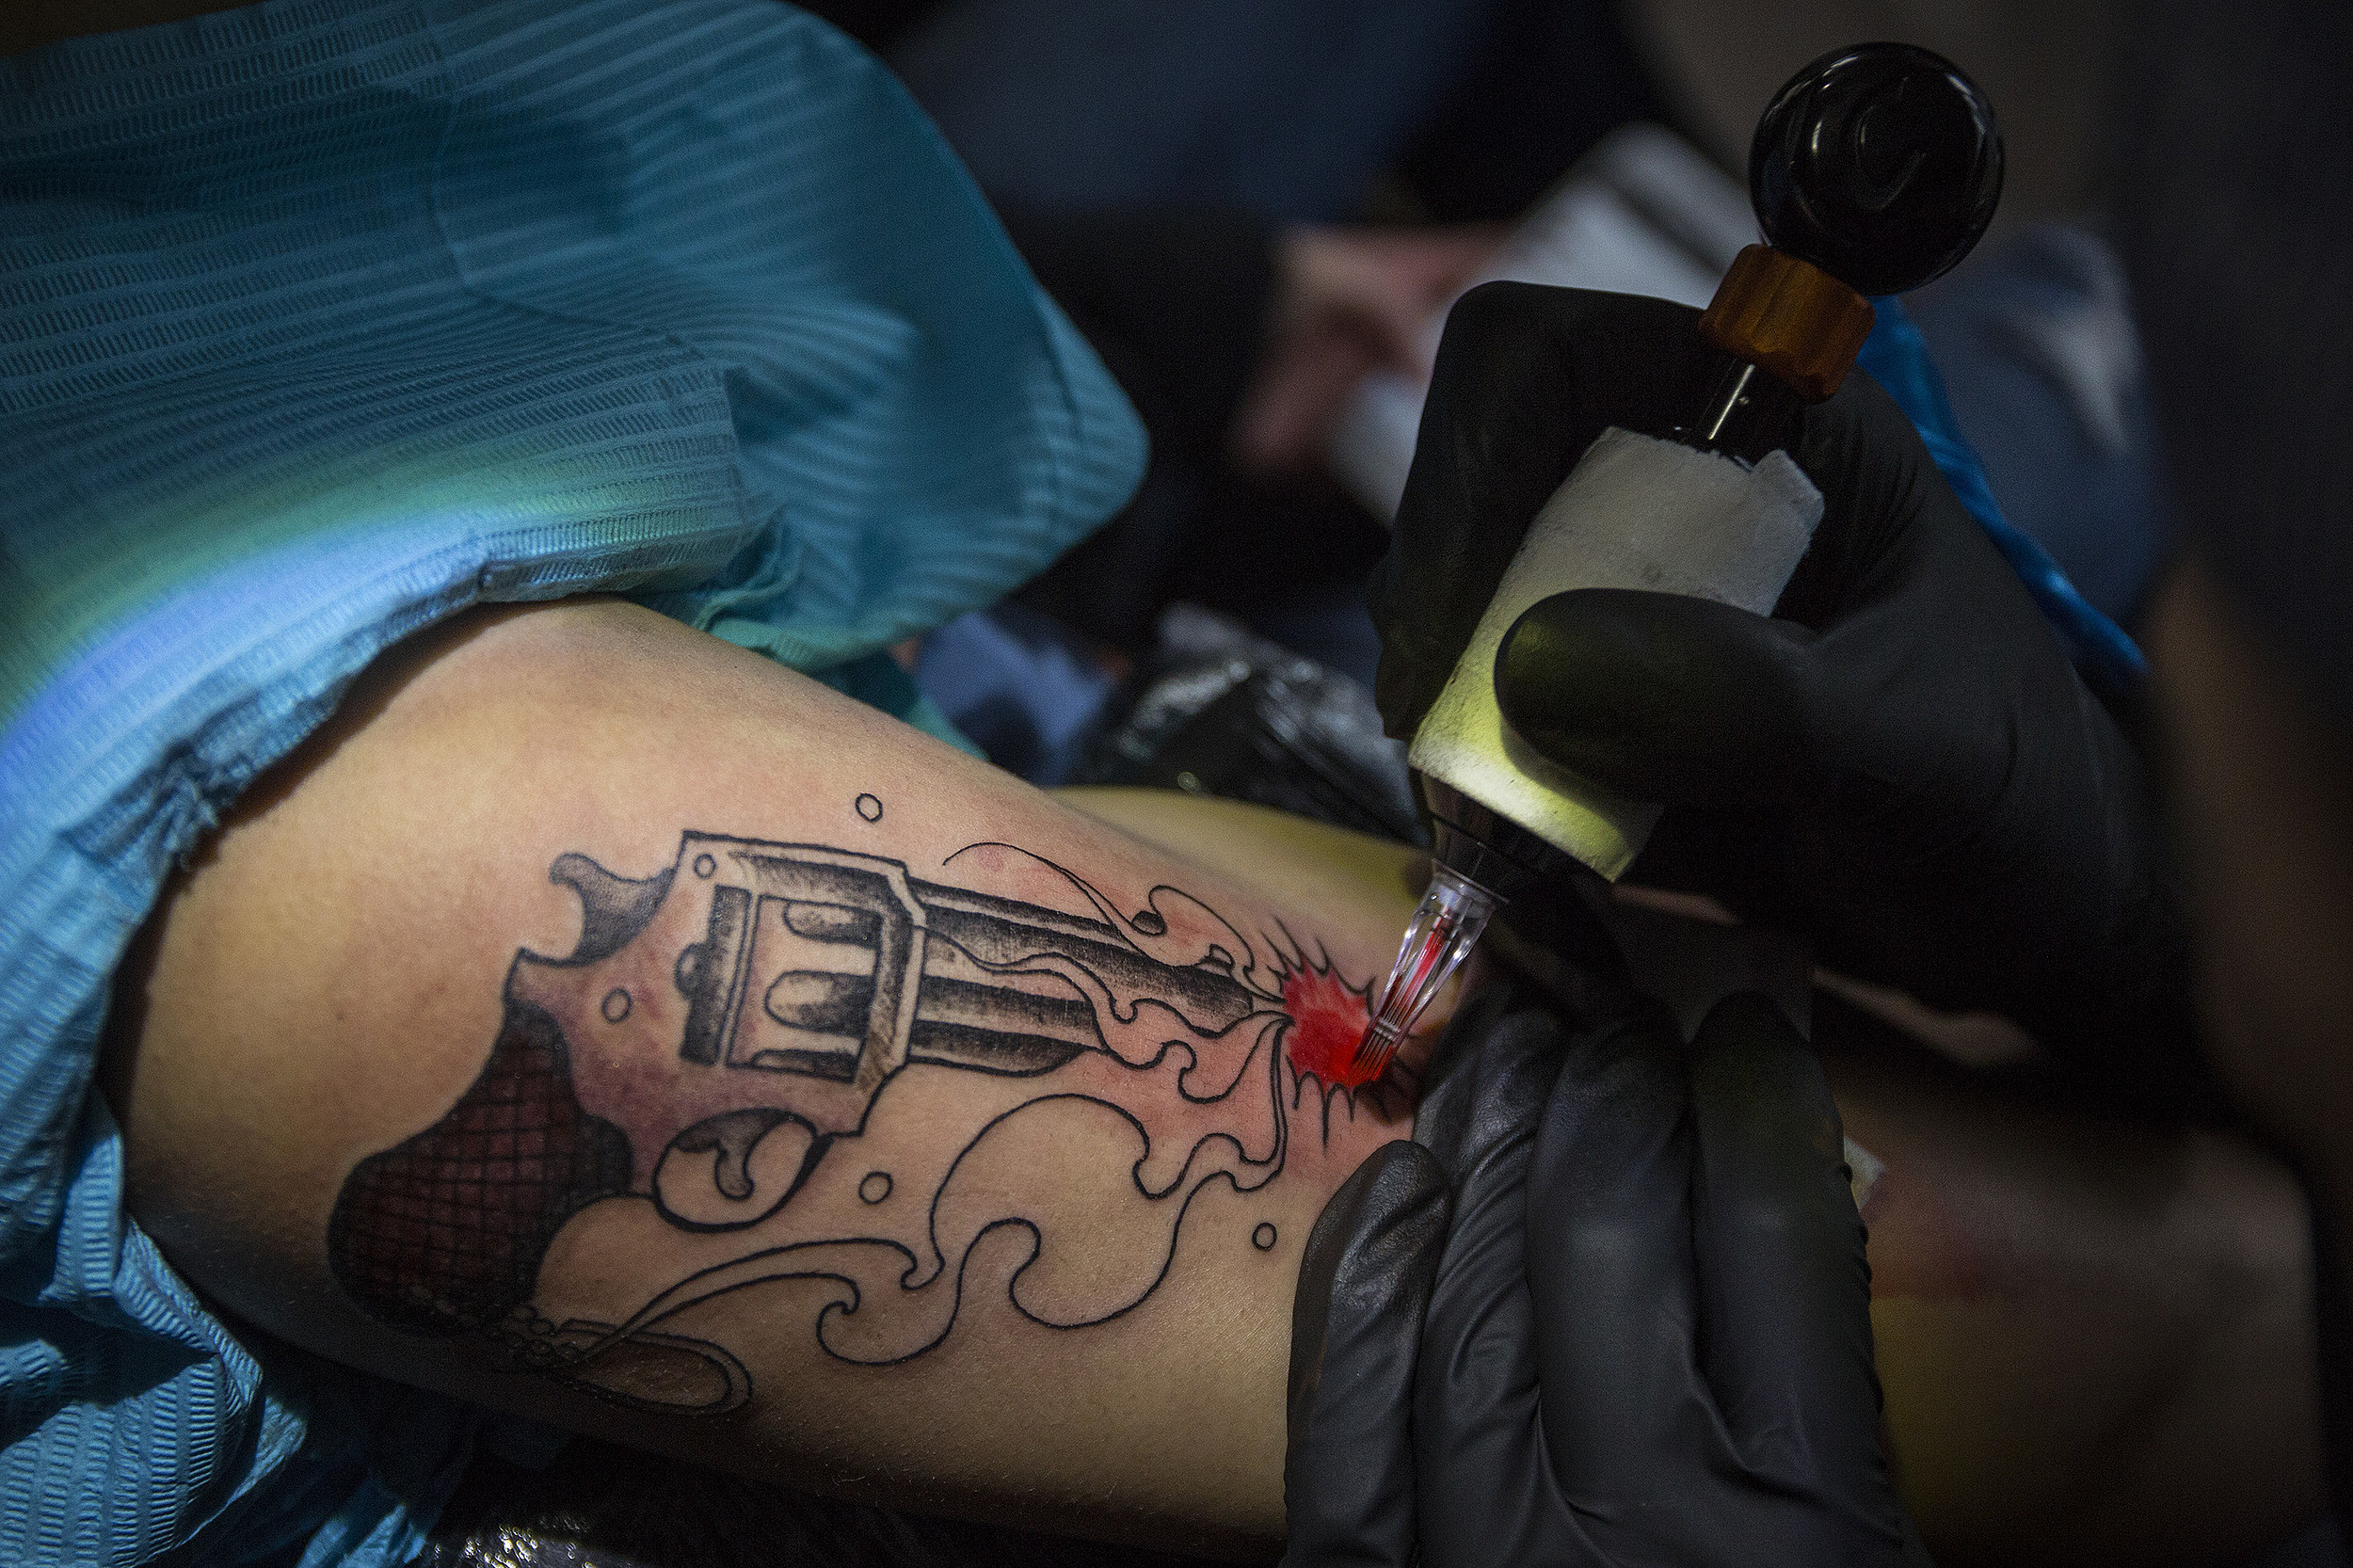 The best tattoo parlor in Paris – A Shaded View on Fashion